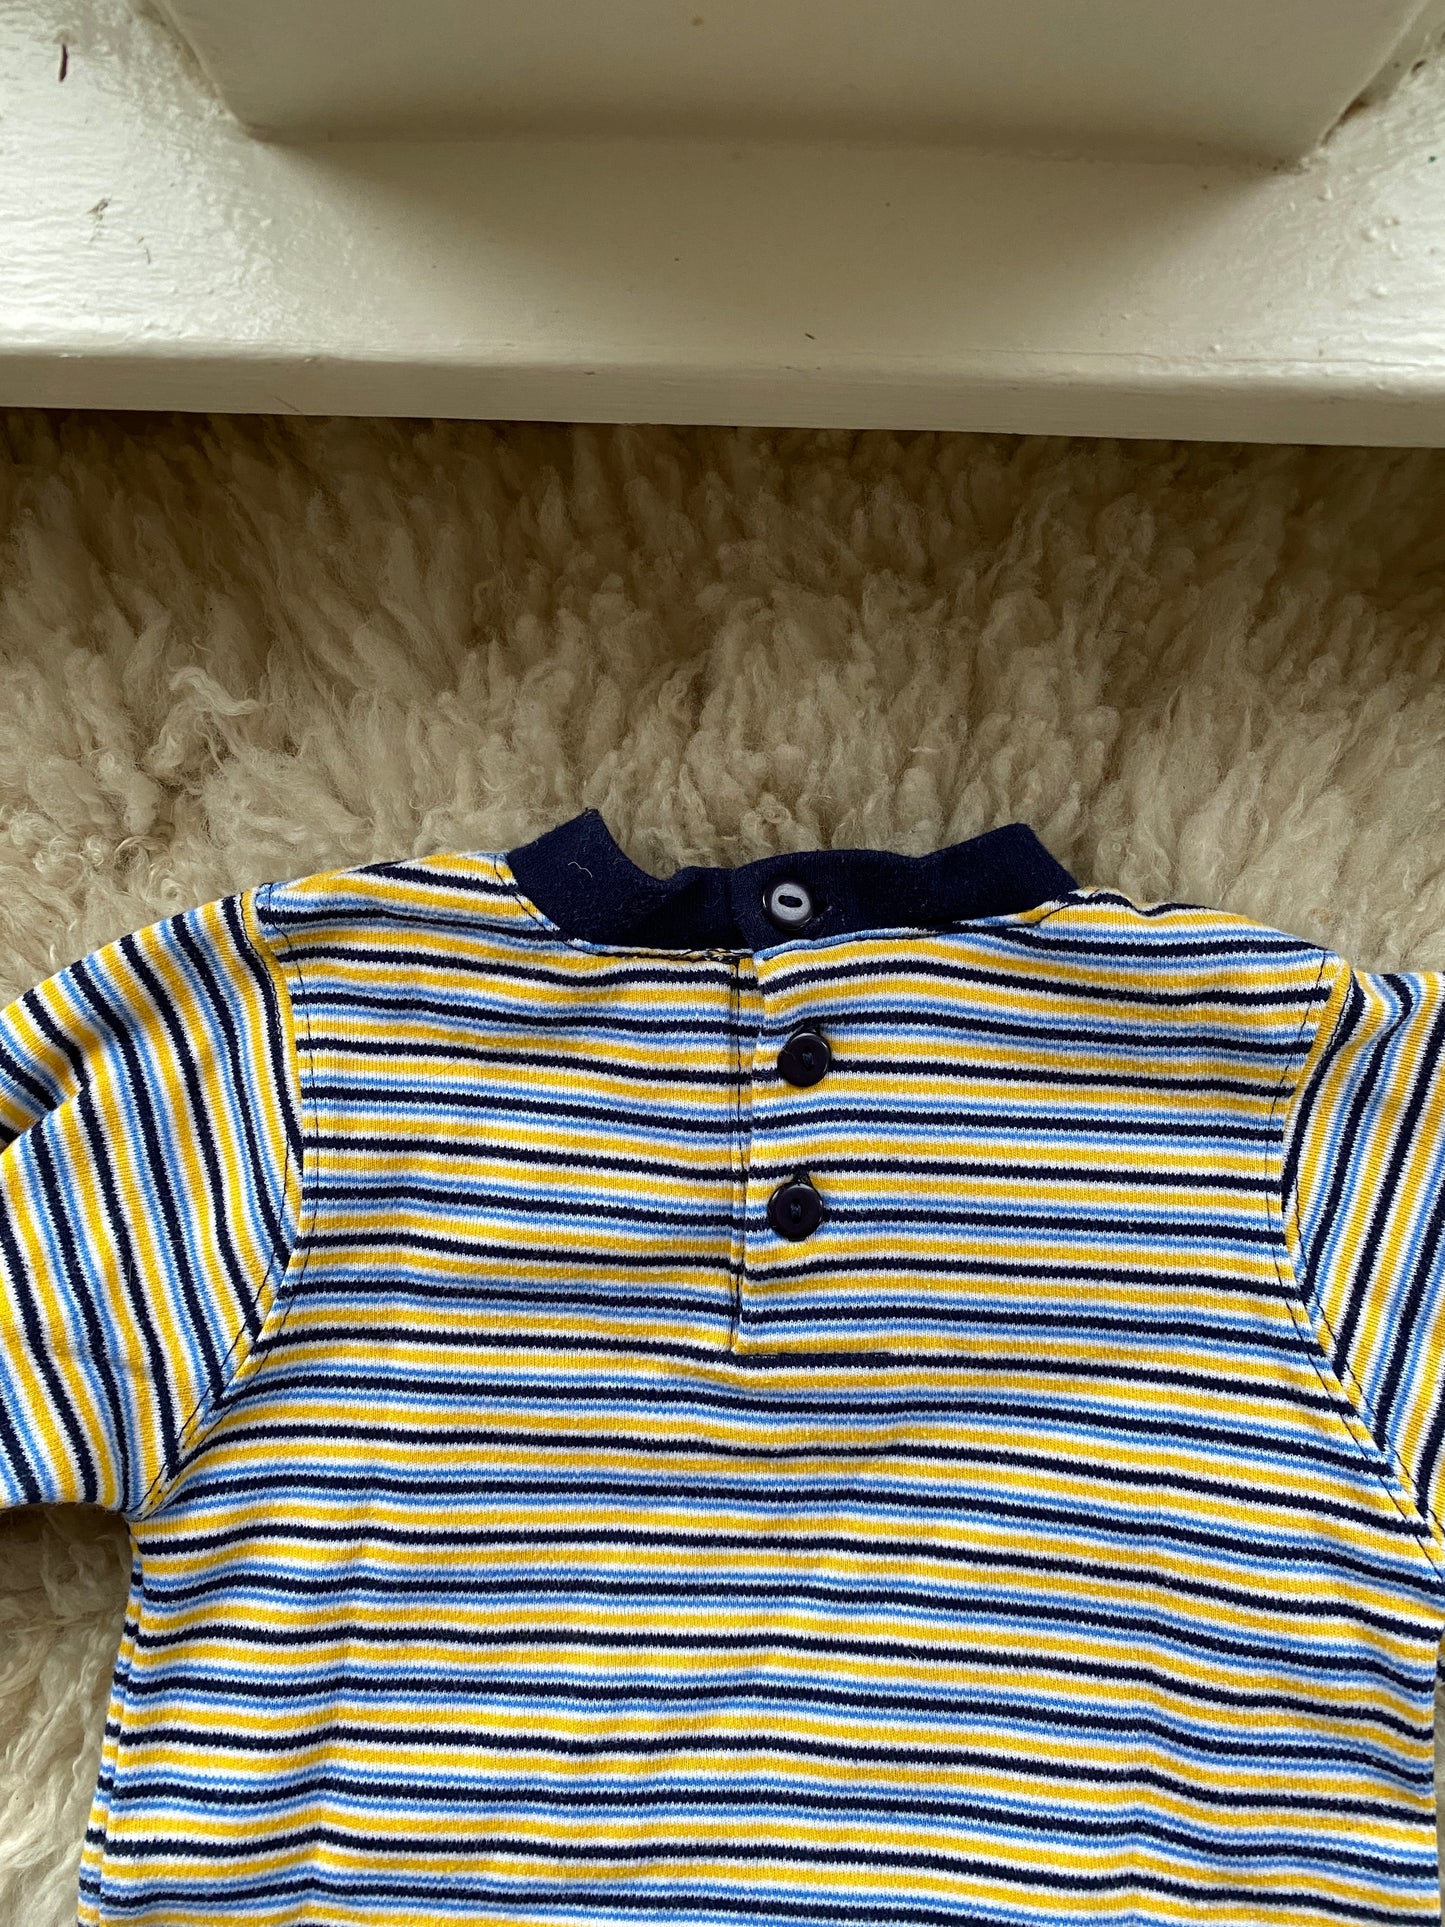 vintage striped baby shirt, 3-6 months